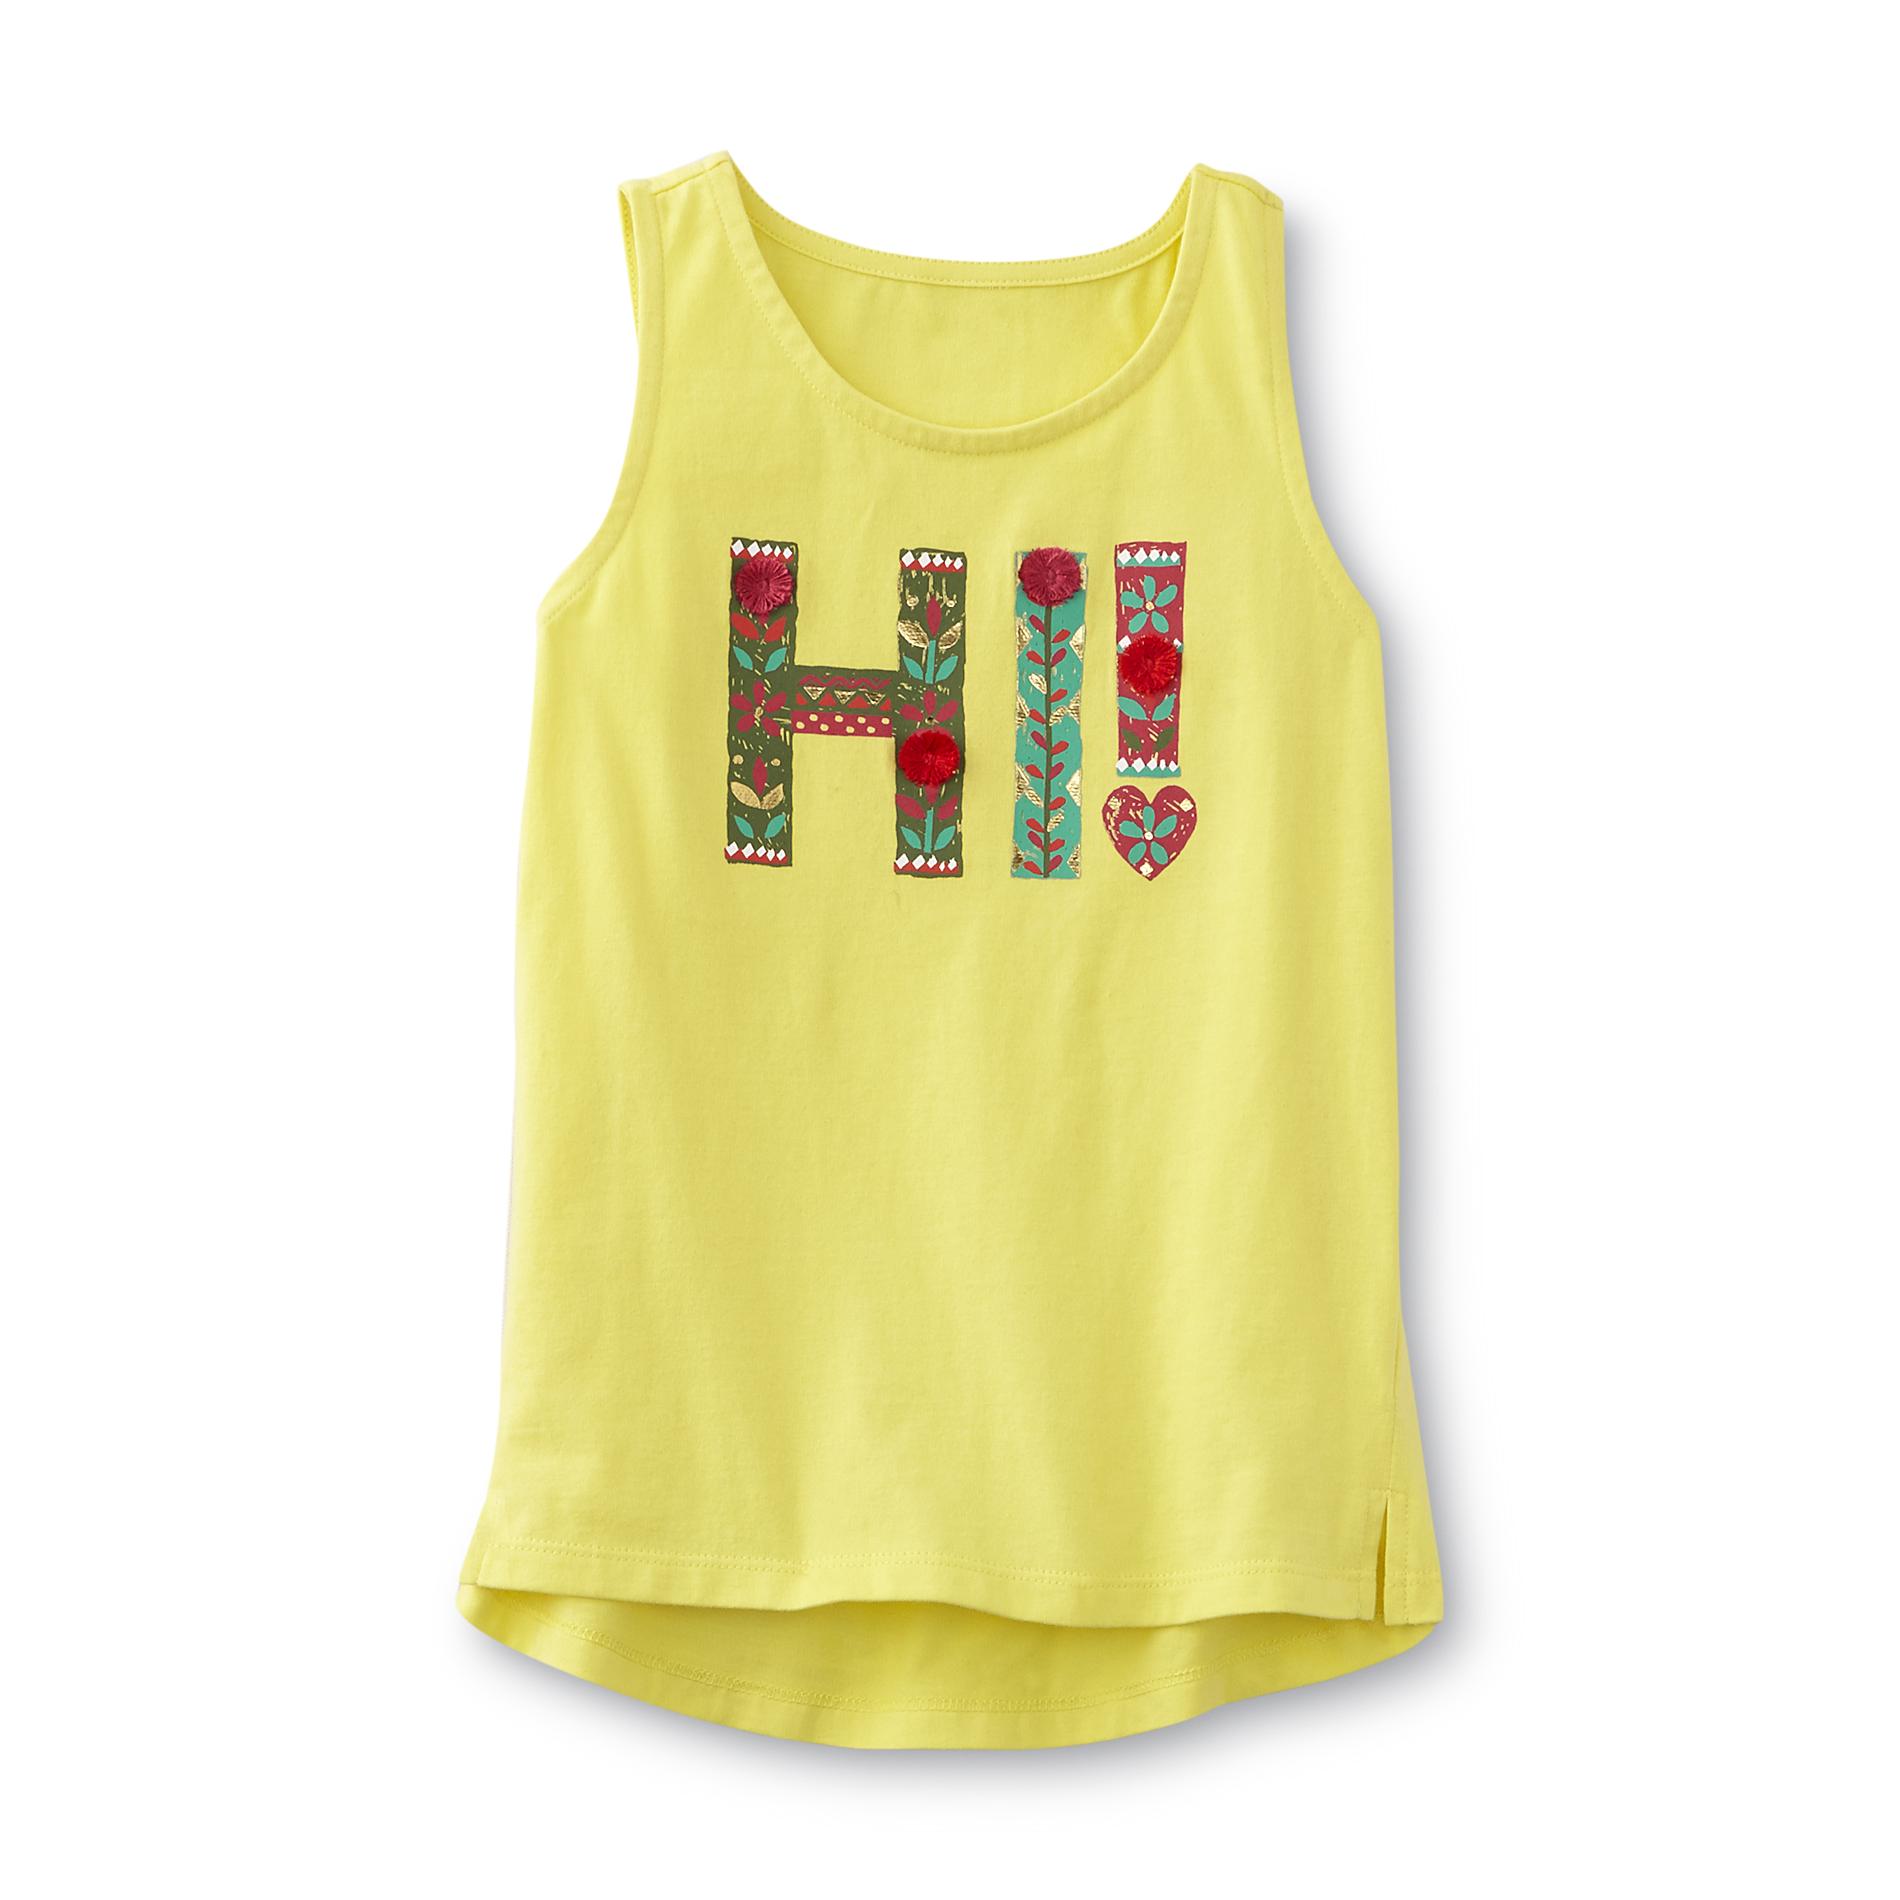 Girl's Graphic Tank Top - Floral